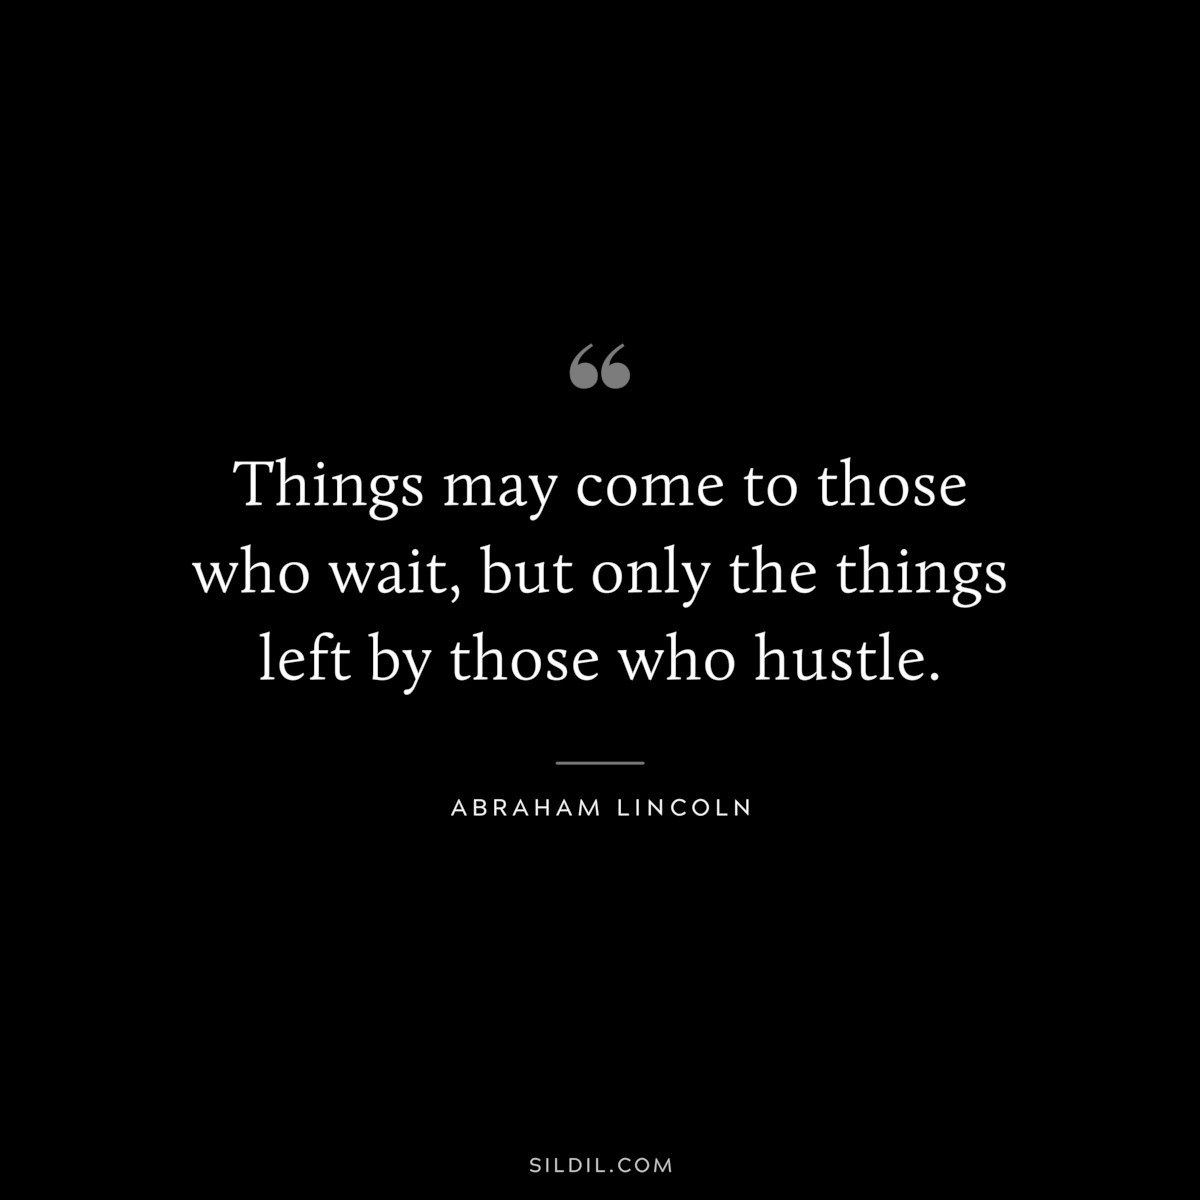 Things may come to those who wait, but only the things left by those who hustle. ― Abraham Lincoln